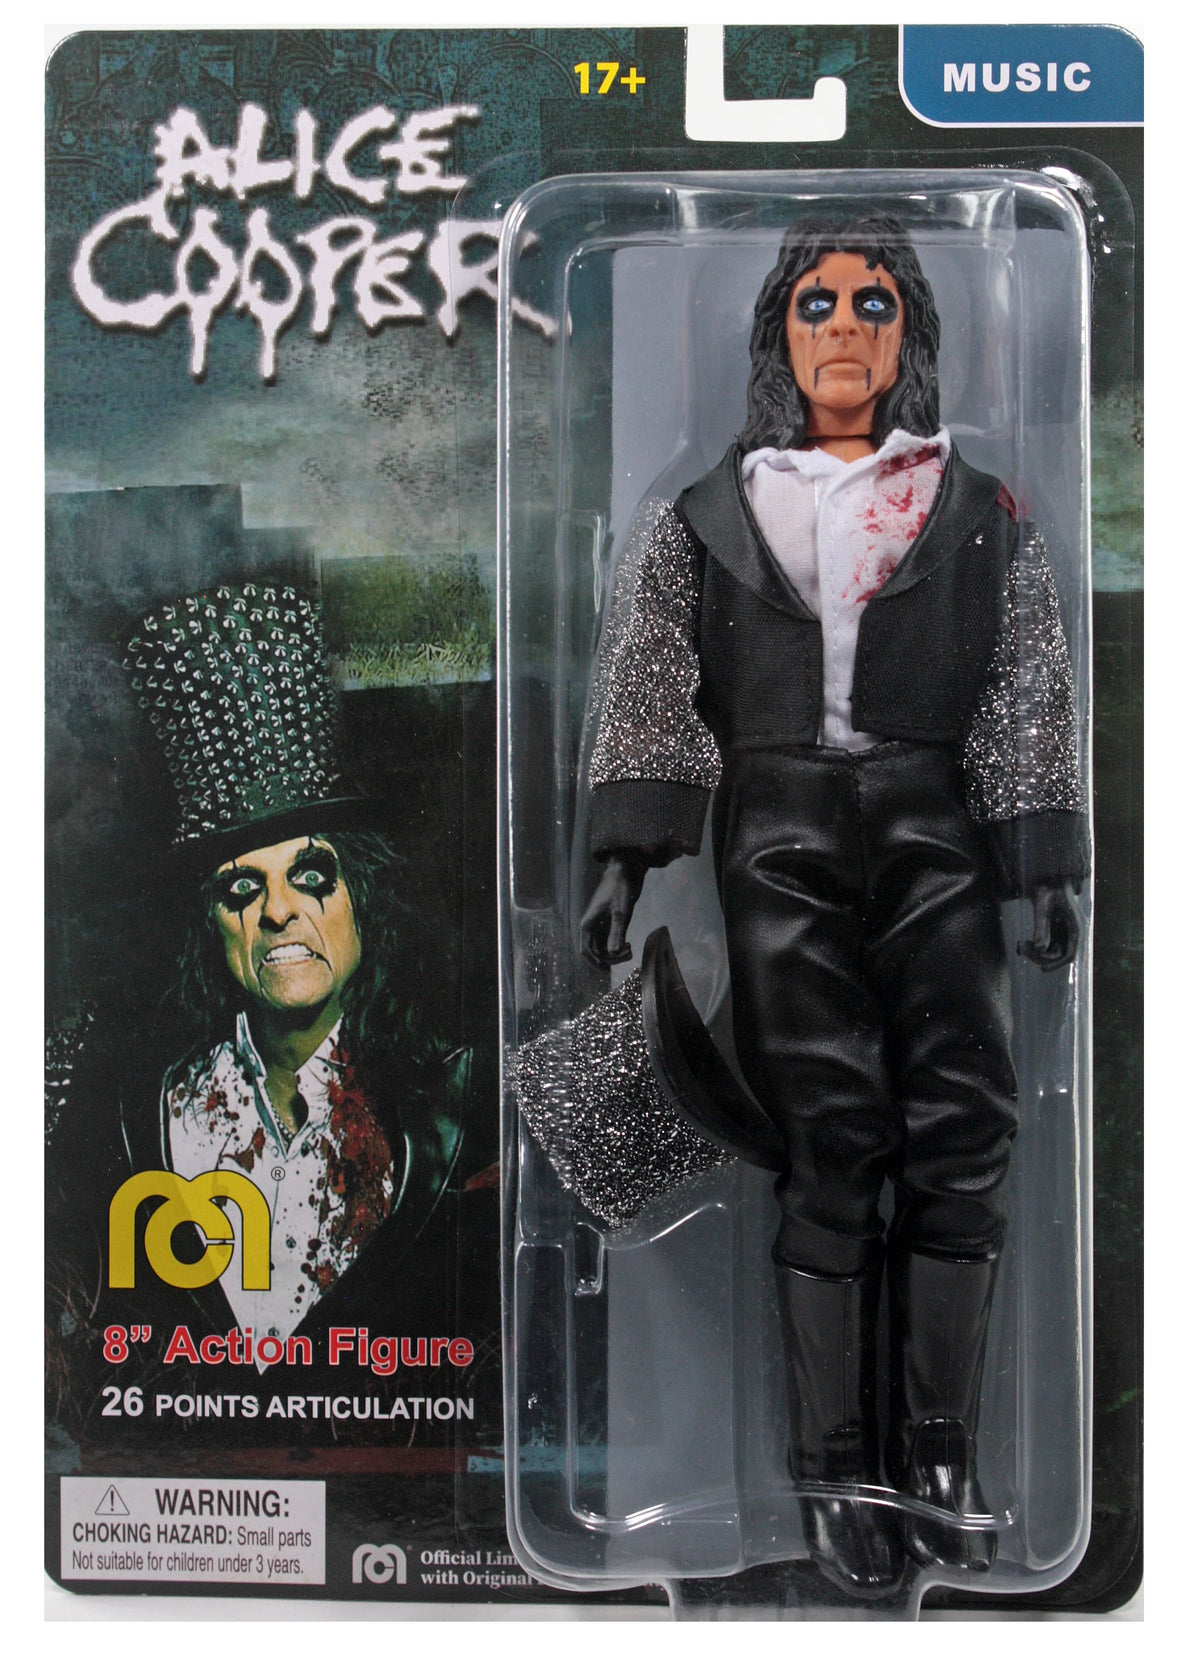 Mego Music Wave 18 - Alice Cooper - "Welcome to My Nightmare" 8" Action Figure (Re-Release of Wave 17 Version)